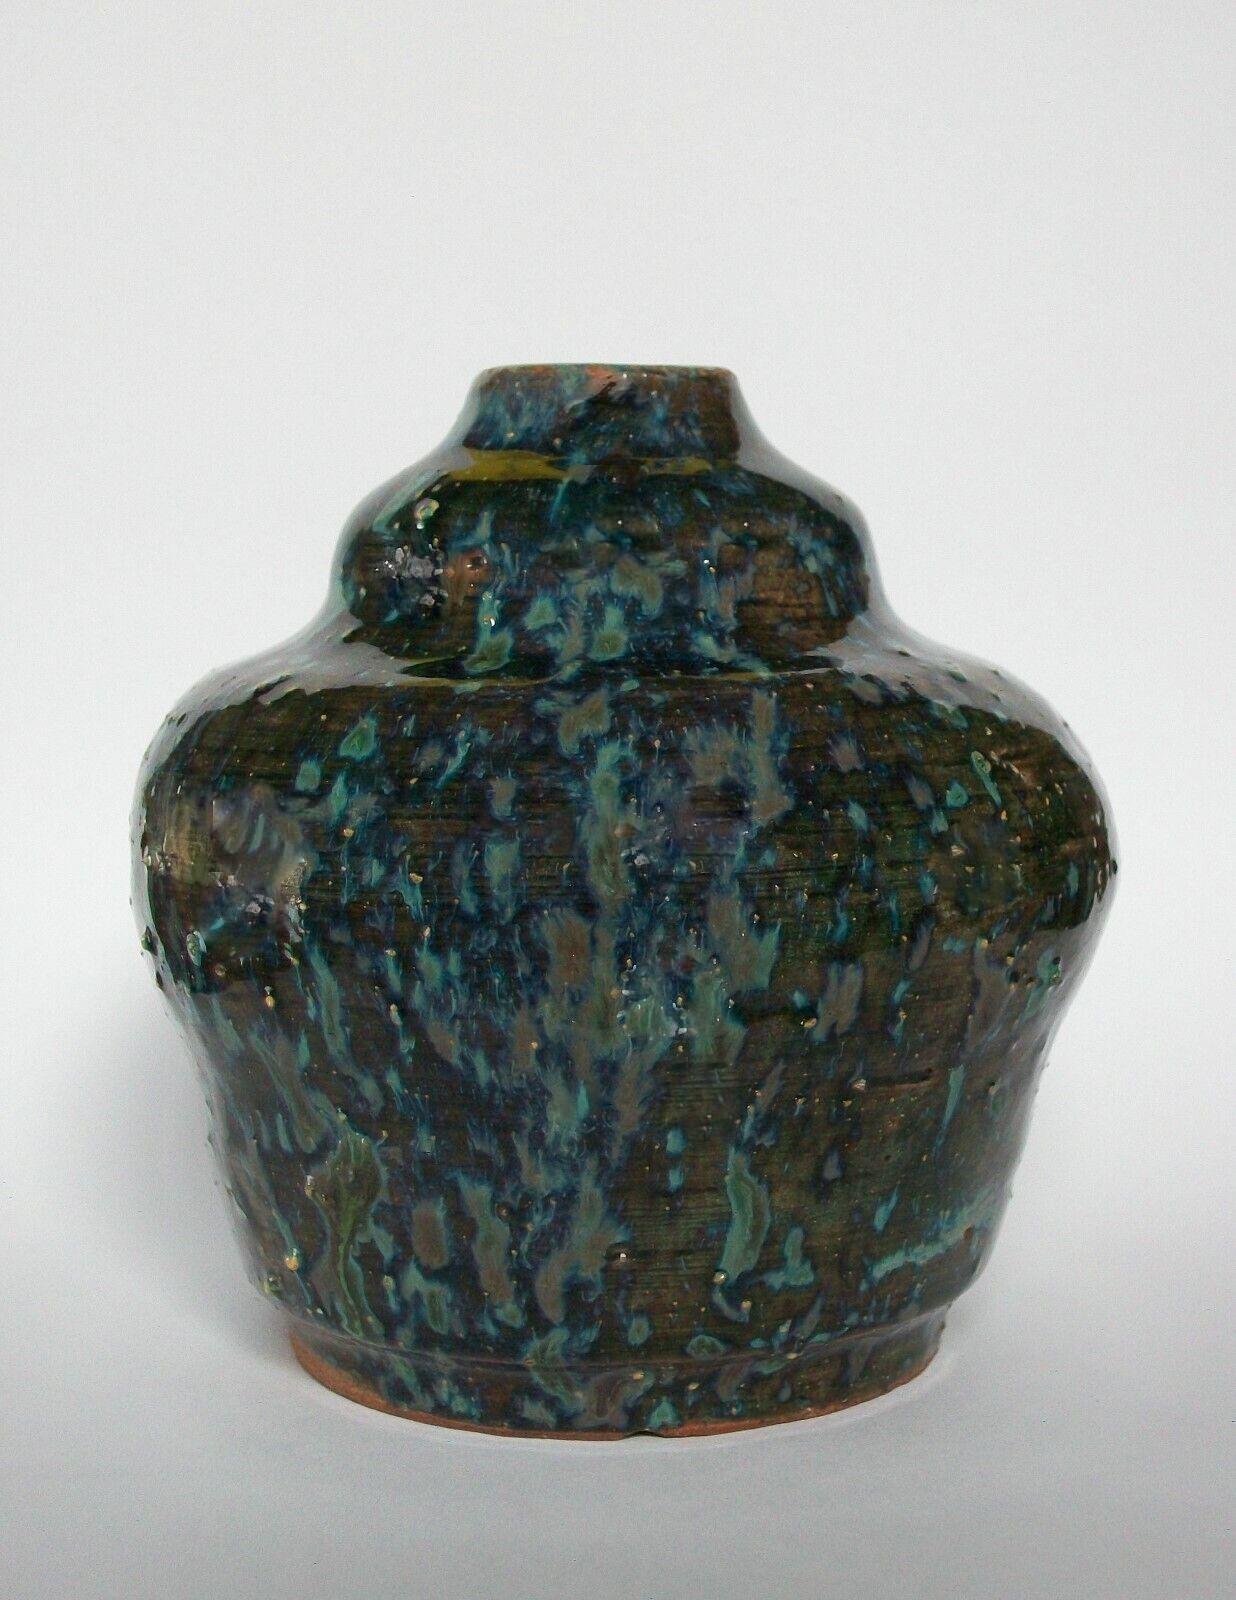 Art Nouveau studio pottery vase - wheel thrown terracotta - clear green glaze with blue opalescent splash - unsigned - country of origin unknown - early 20th century.

Excellent vintage condition - minor flea bite/glaze chips to the rim -